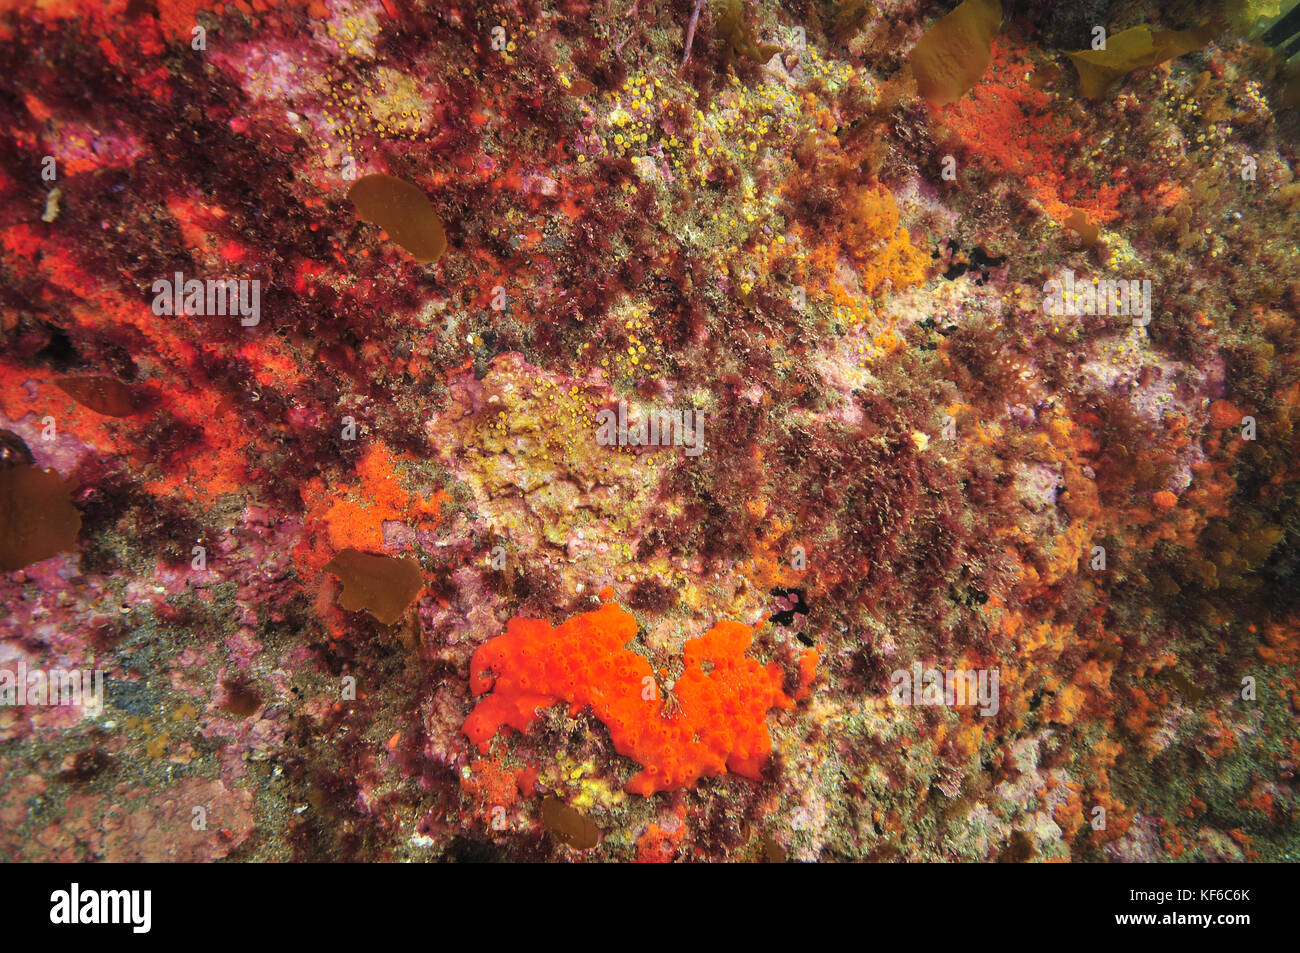 Rocky reef wall covered with colourful encrusting invertebrates and pink algae. Stock Photo